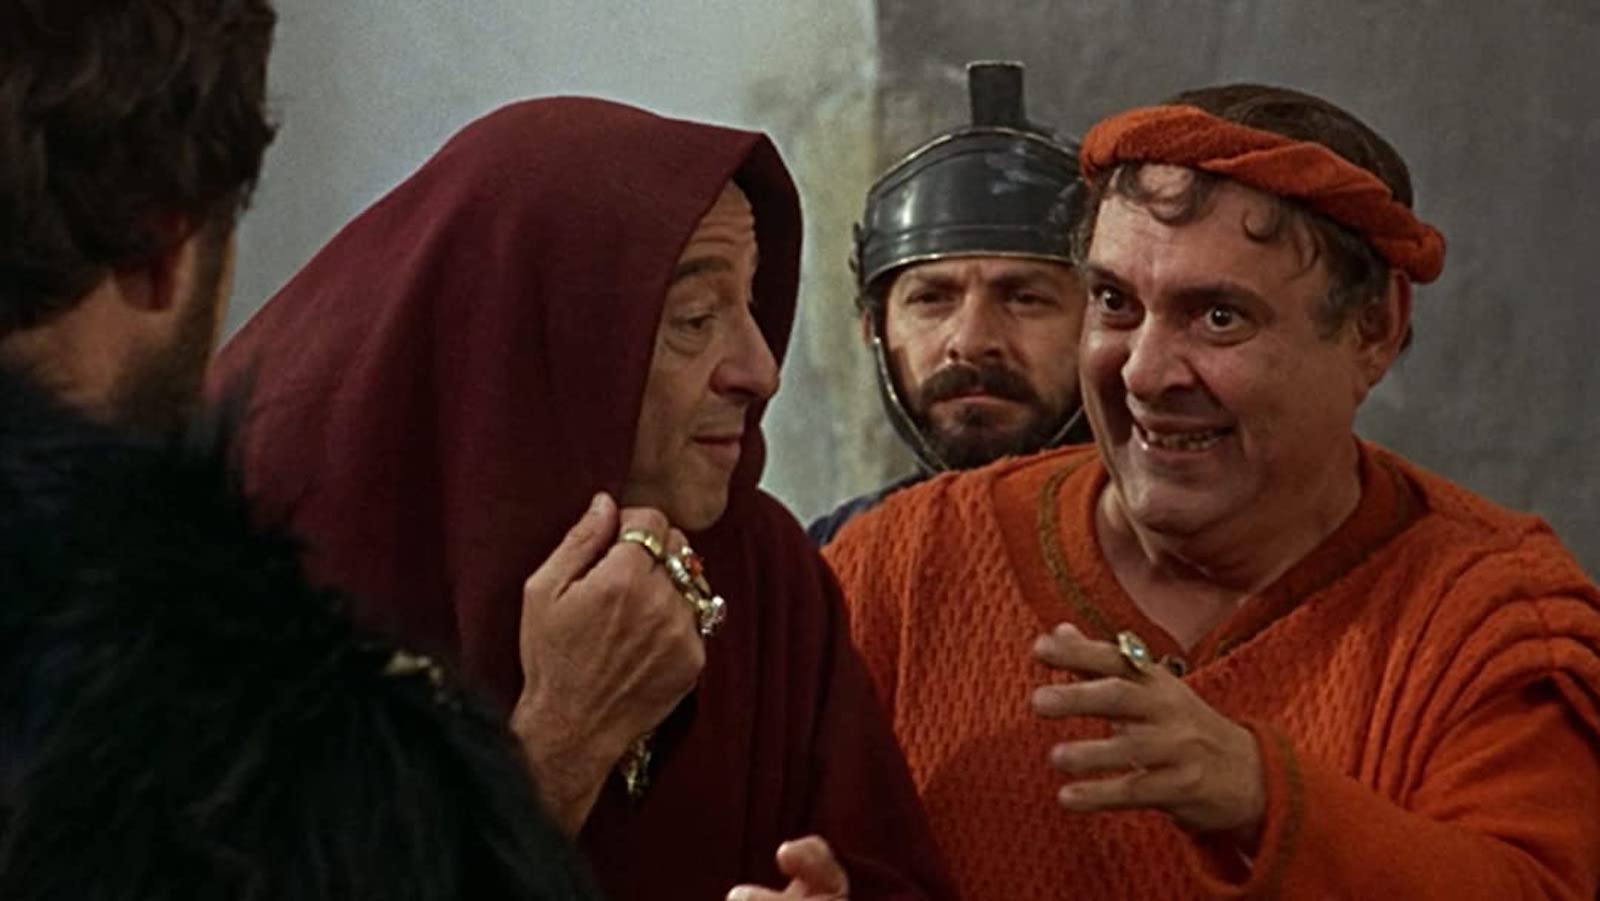 A group of men in ancient Roman garb smile and conspire.